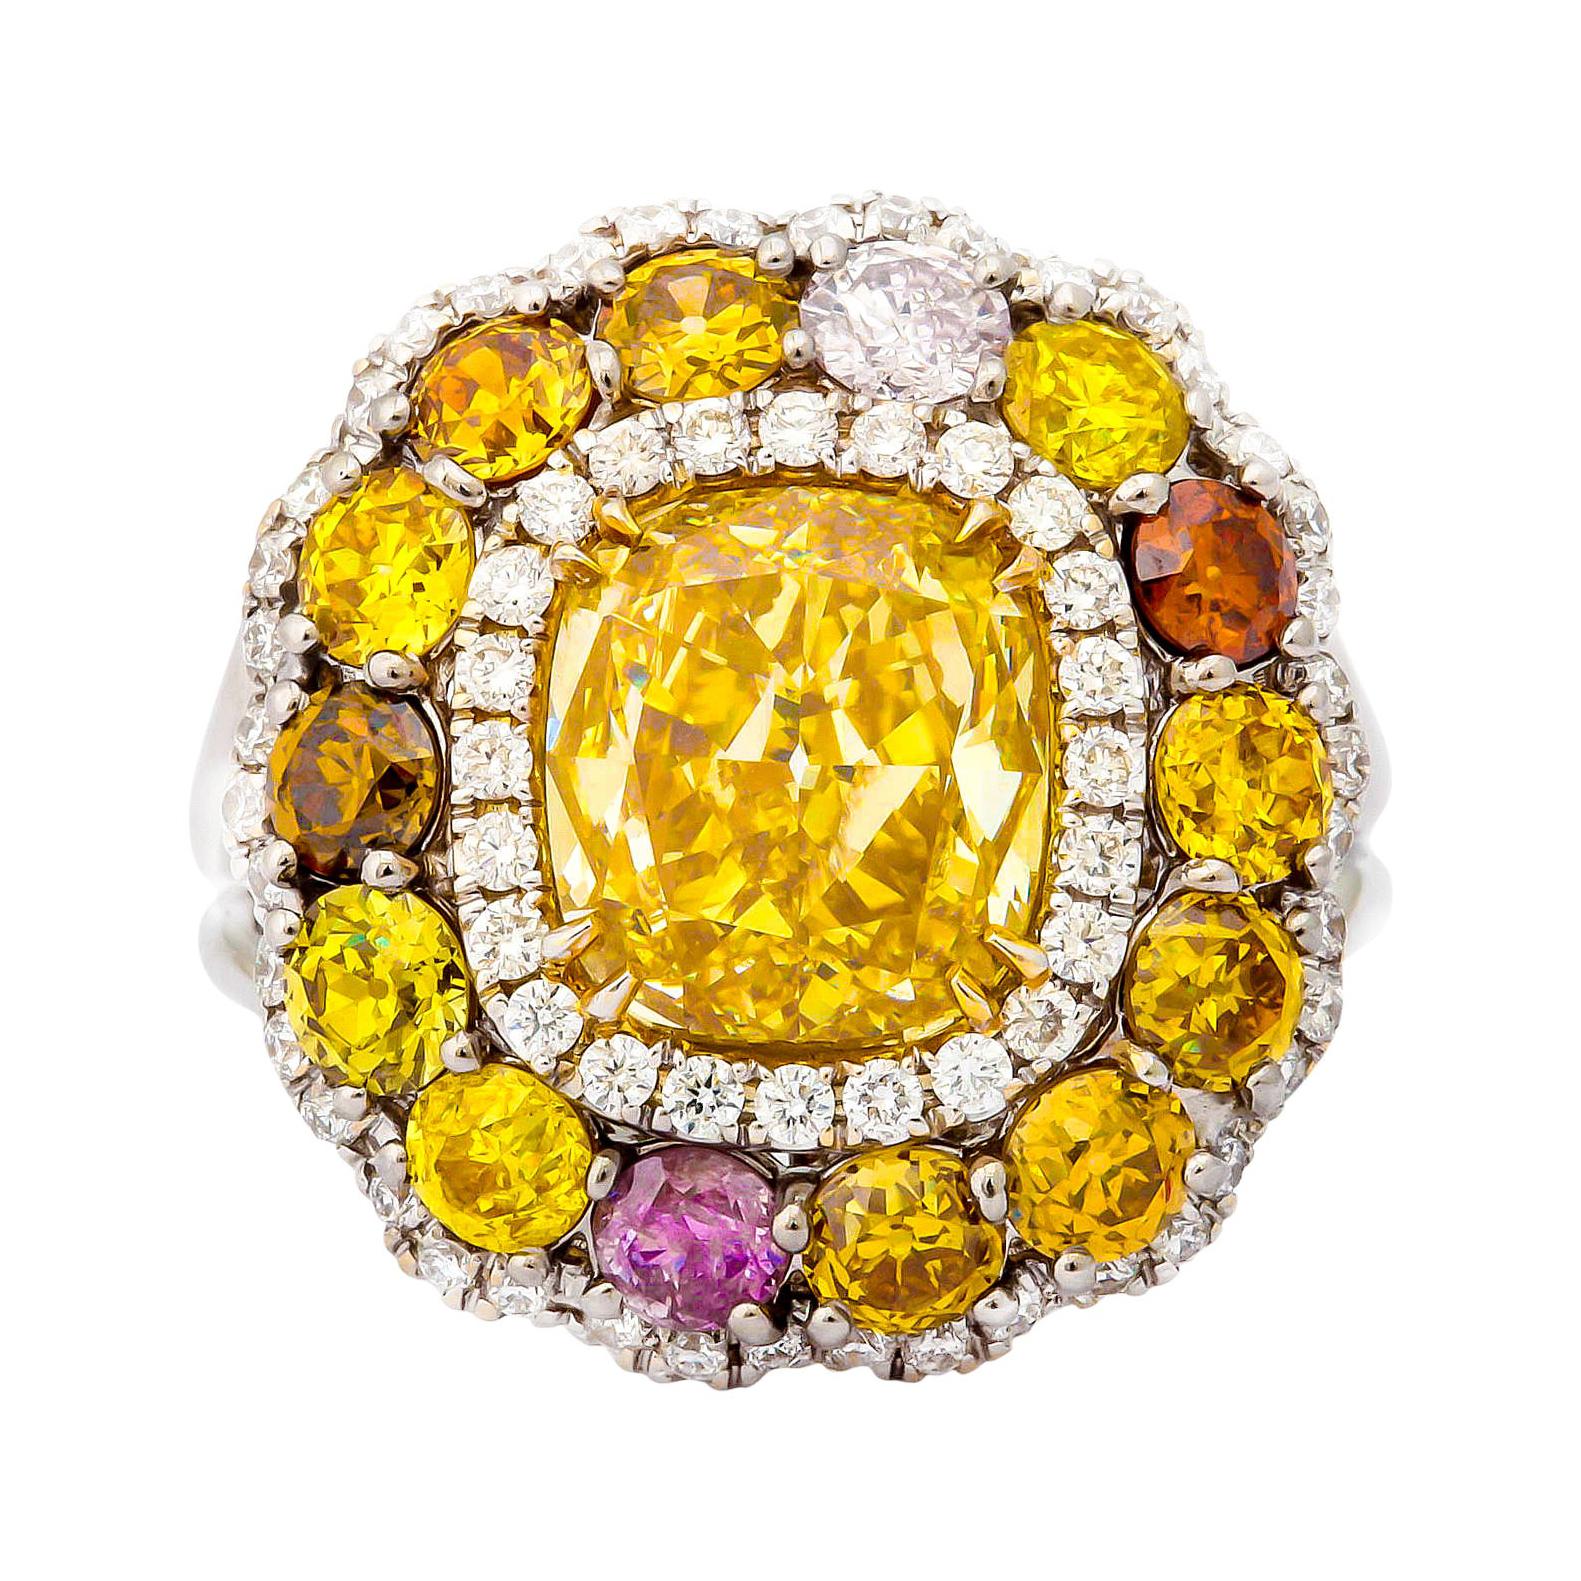 18KT White Gold Cushion Cut Diamond Ring with Fancy Yellow Brownish Center For Sale